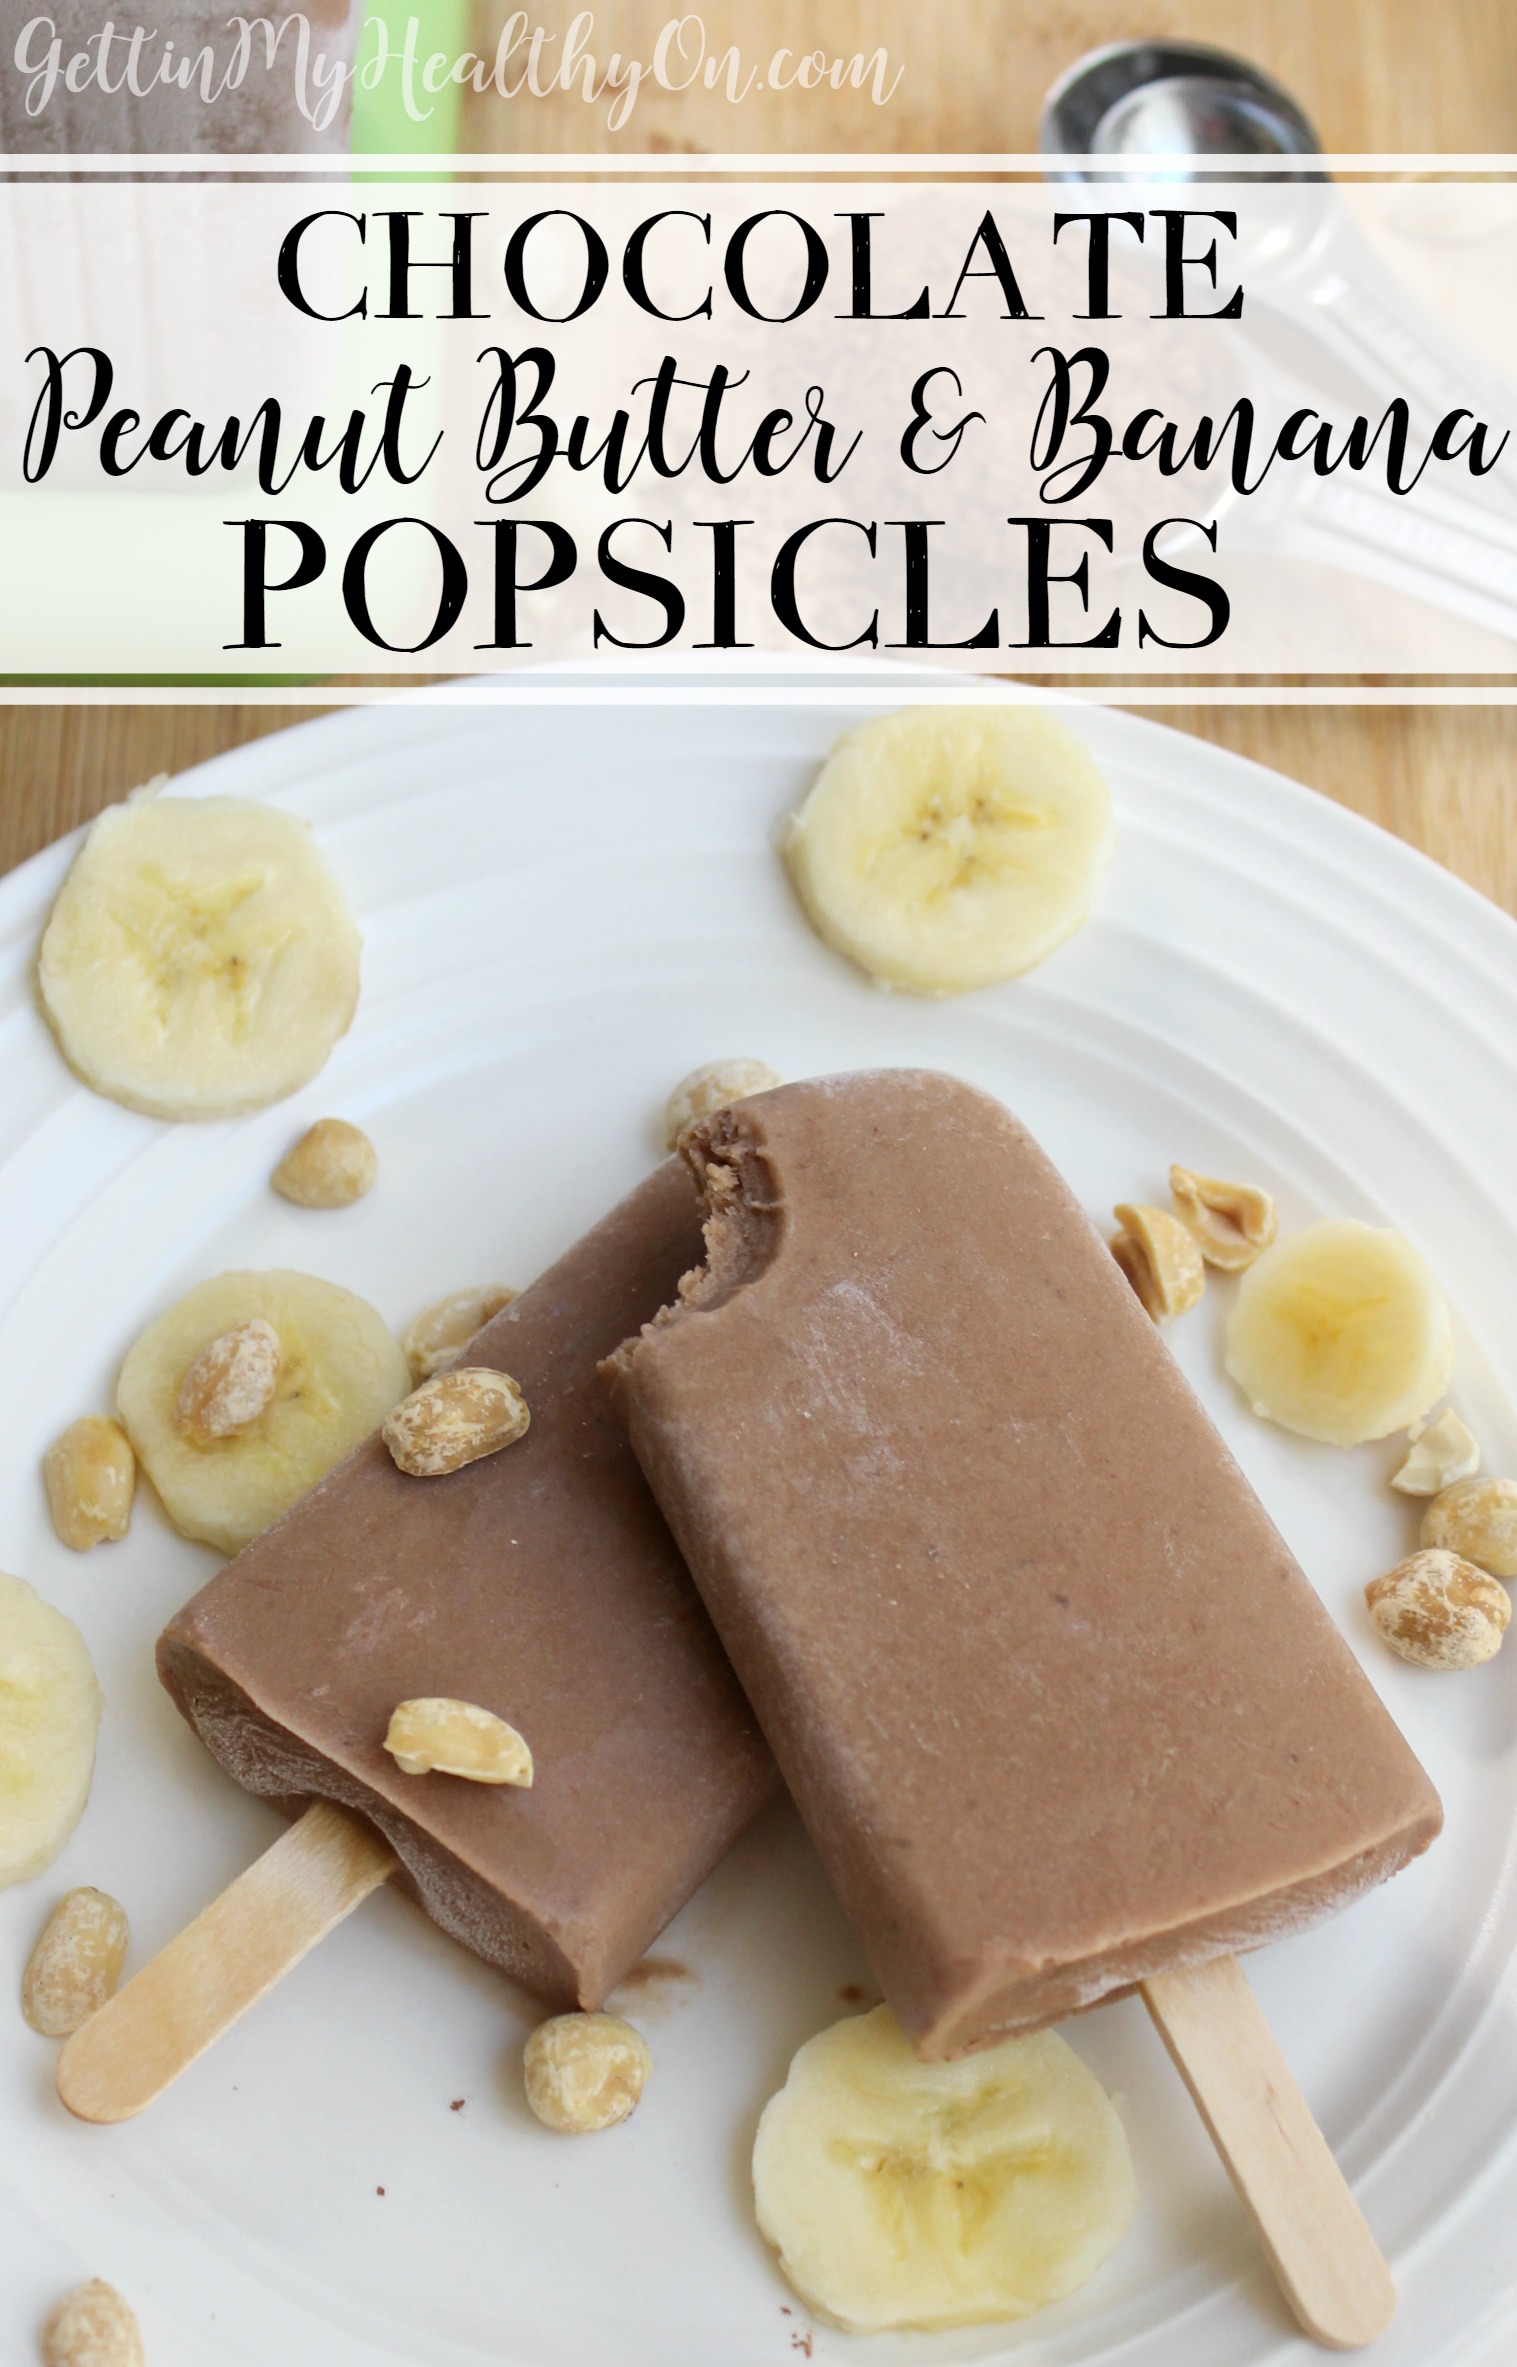 Chocolate, Peanut Butter, & Banana Popsicles